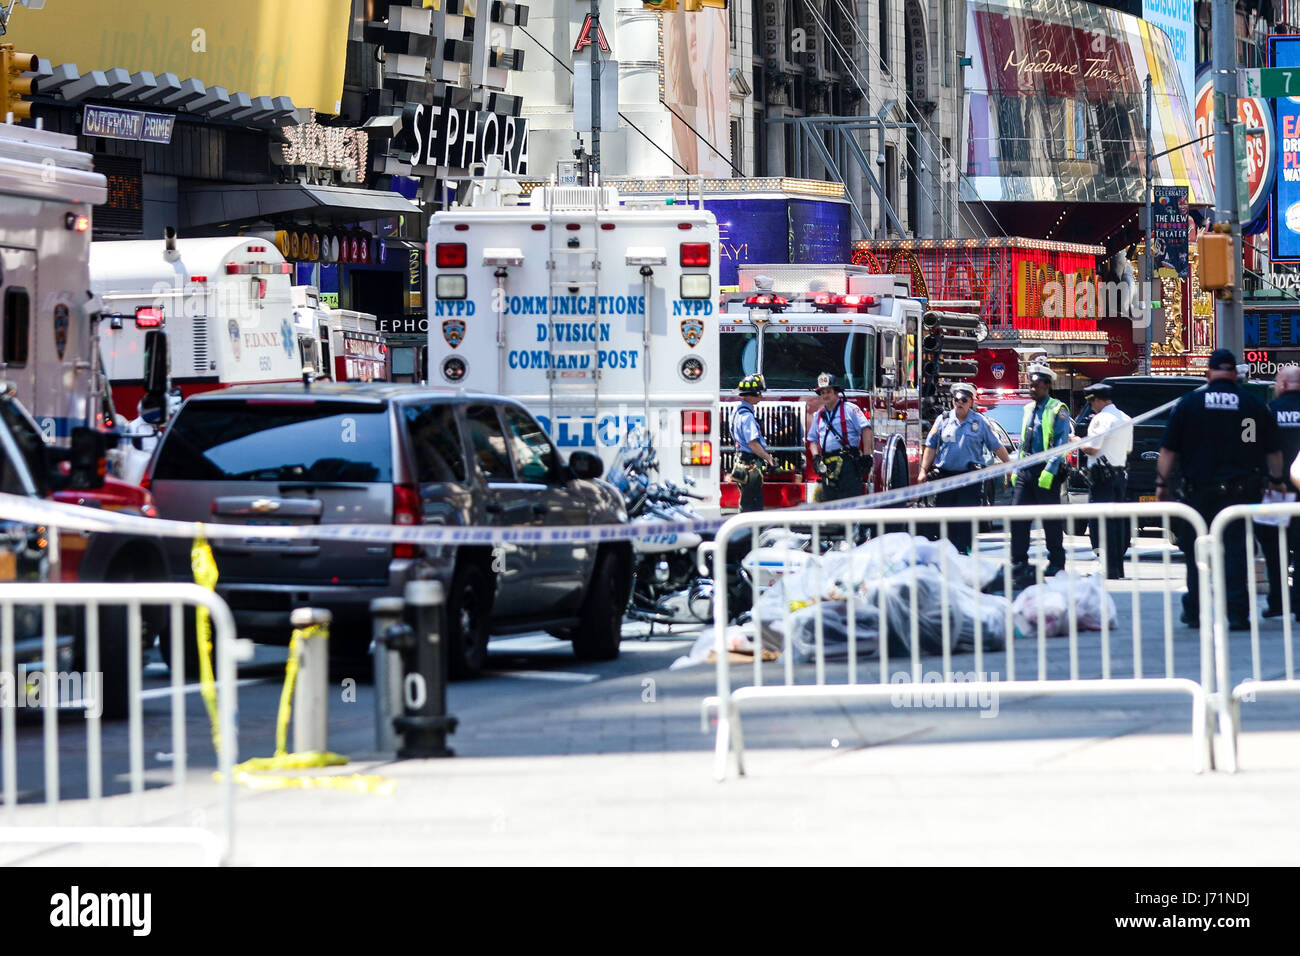 Police officers secure the area near a car after it plunged into pedestrians in Times Square in New York on May 18, 2017. The man who drove a car into a crowd in Times Square on Thursday, killing one person and injuring 22 others, served in the US Navy and has a criminal record, New York's mayor said, adding authorities did not believe it was a terror attack. (PHOTO: WILLIAM VOLCOV/BRAZIL PHOTO PRESS) Stock Photo